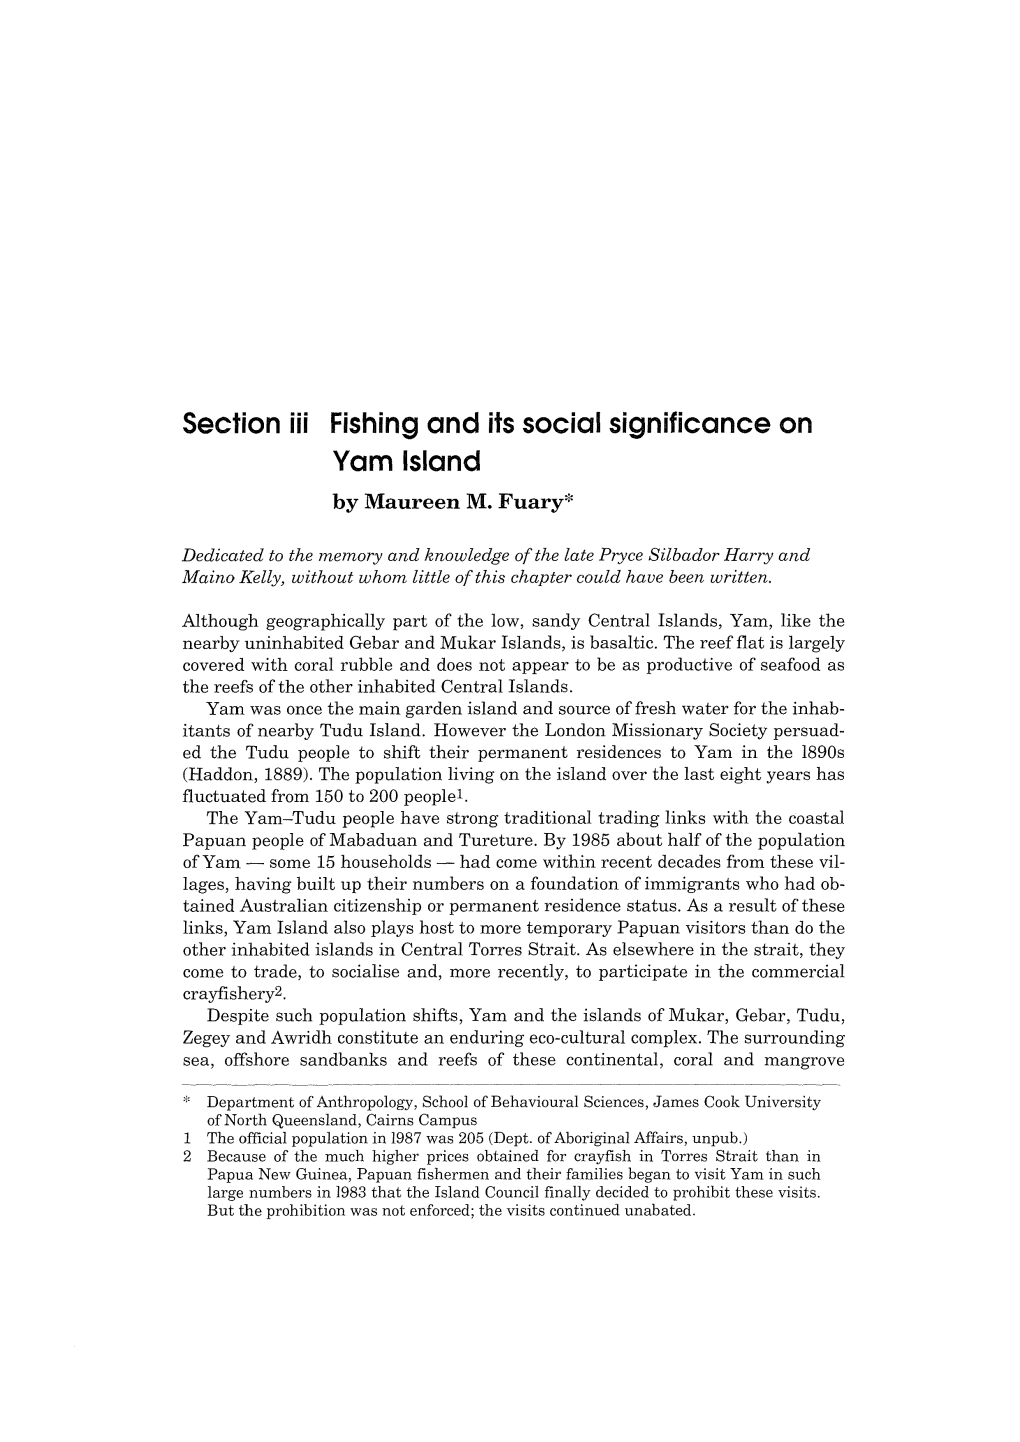 Section Iii Fishing and Its Social Significance on Yam Island by Maureen M